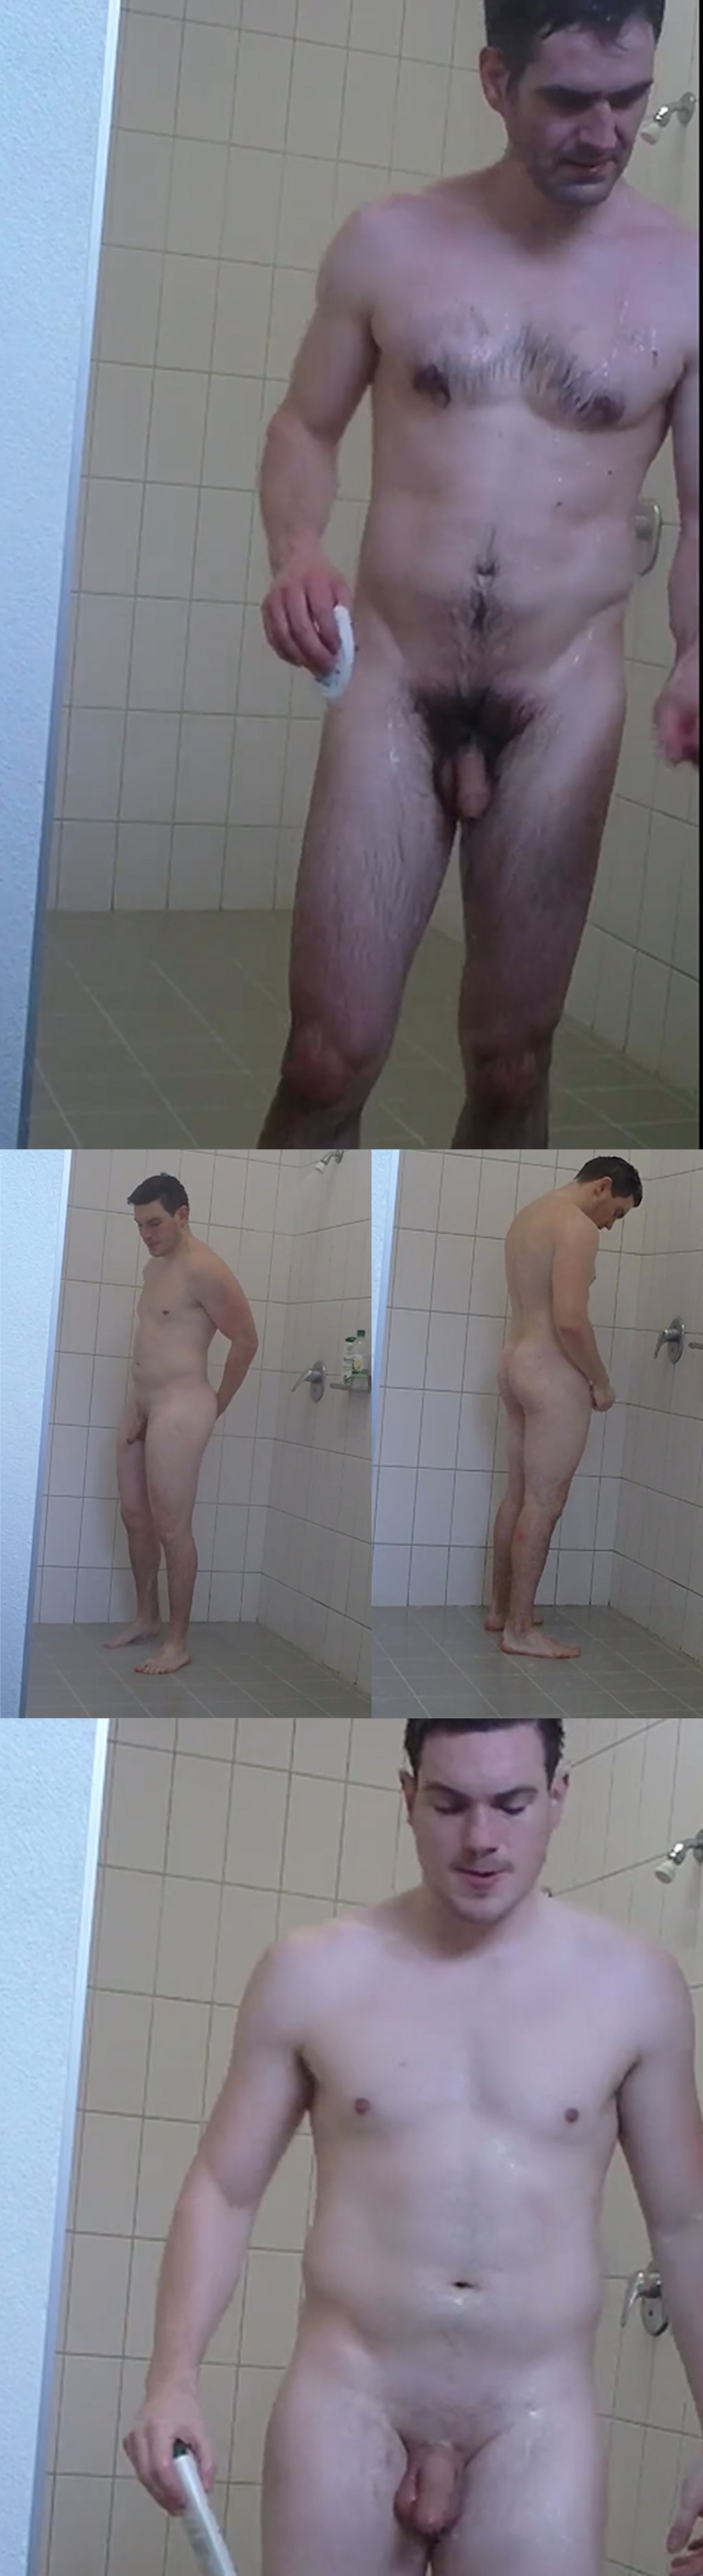 spying uncut nude men in the gym showers